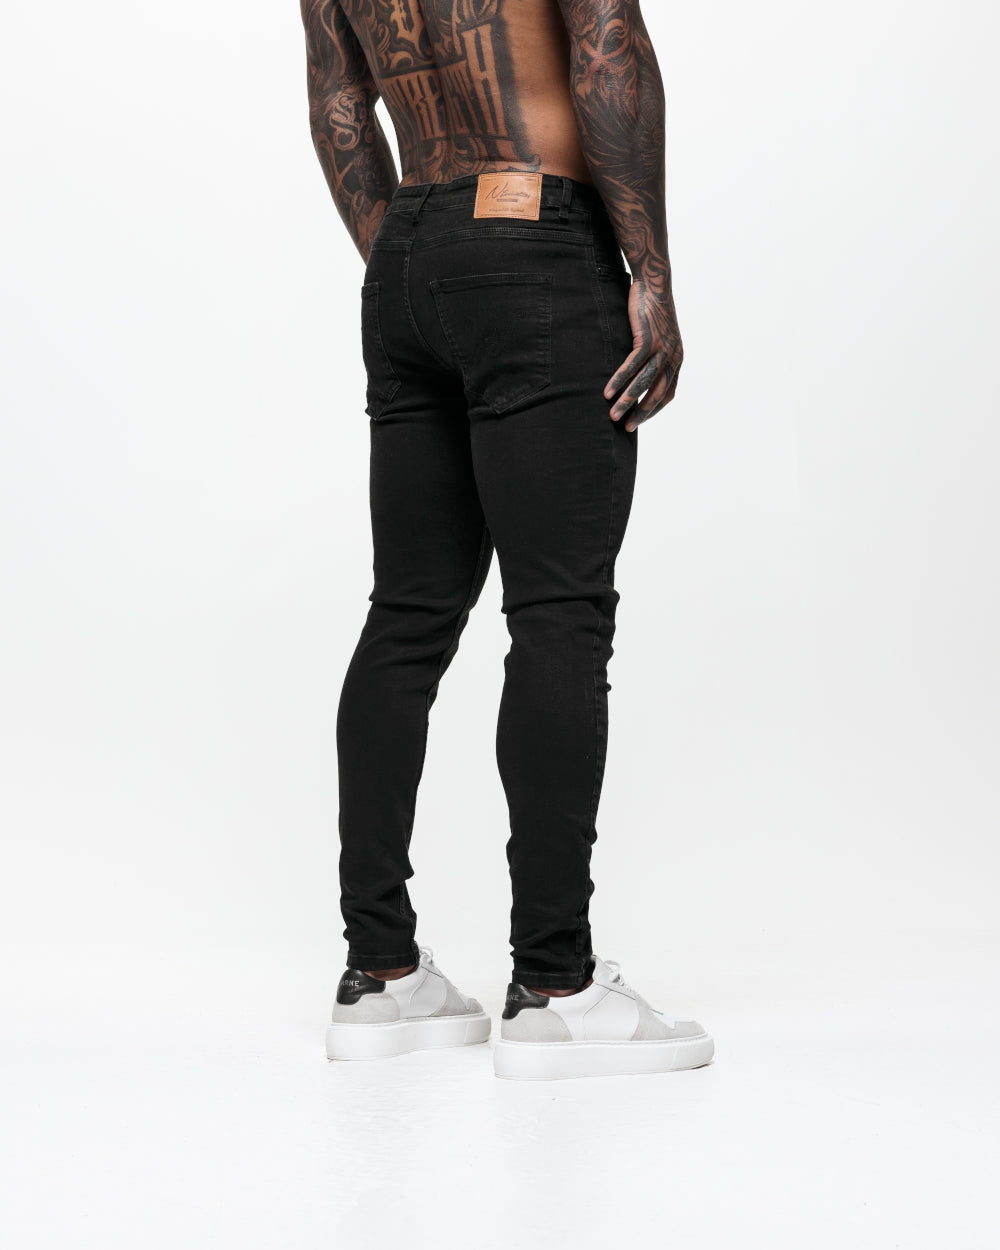 Non Ripped Skinny Jeans - Washed Black